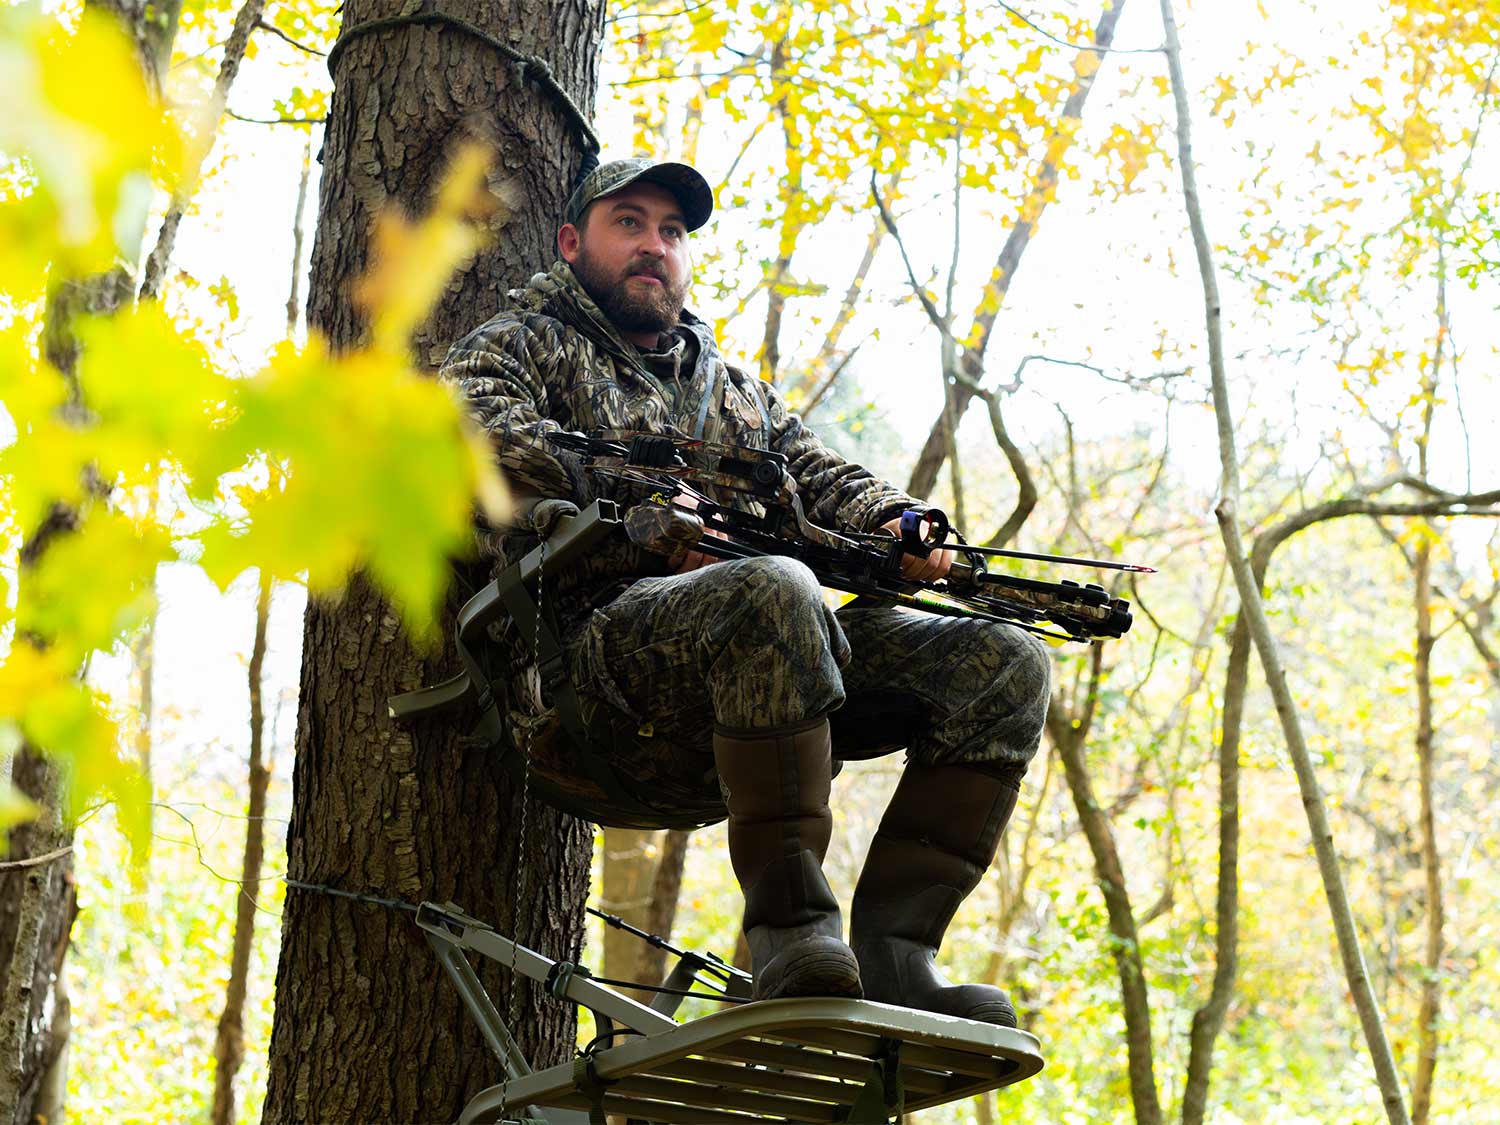 hunter sitting in a tree stand